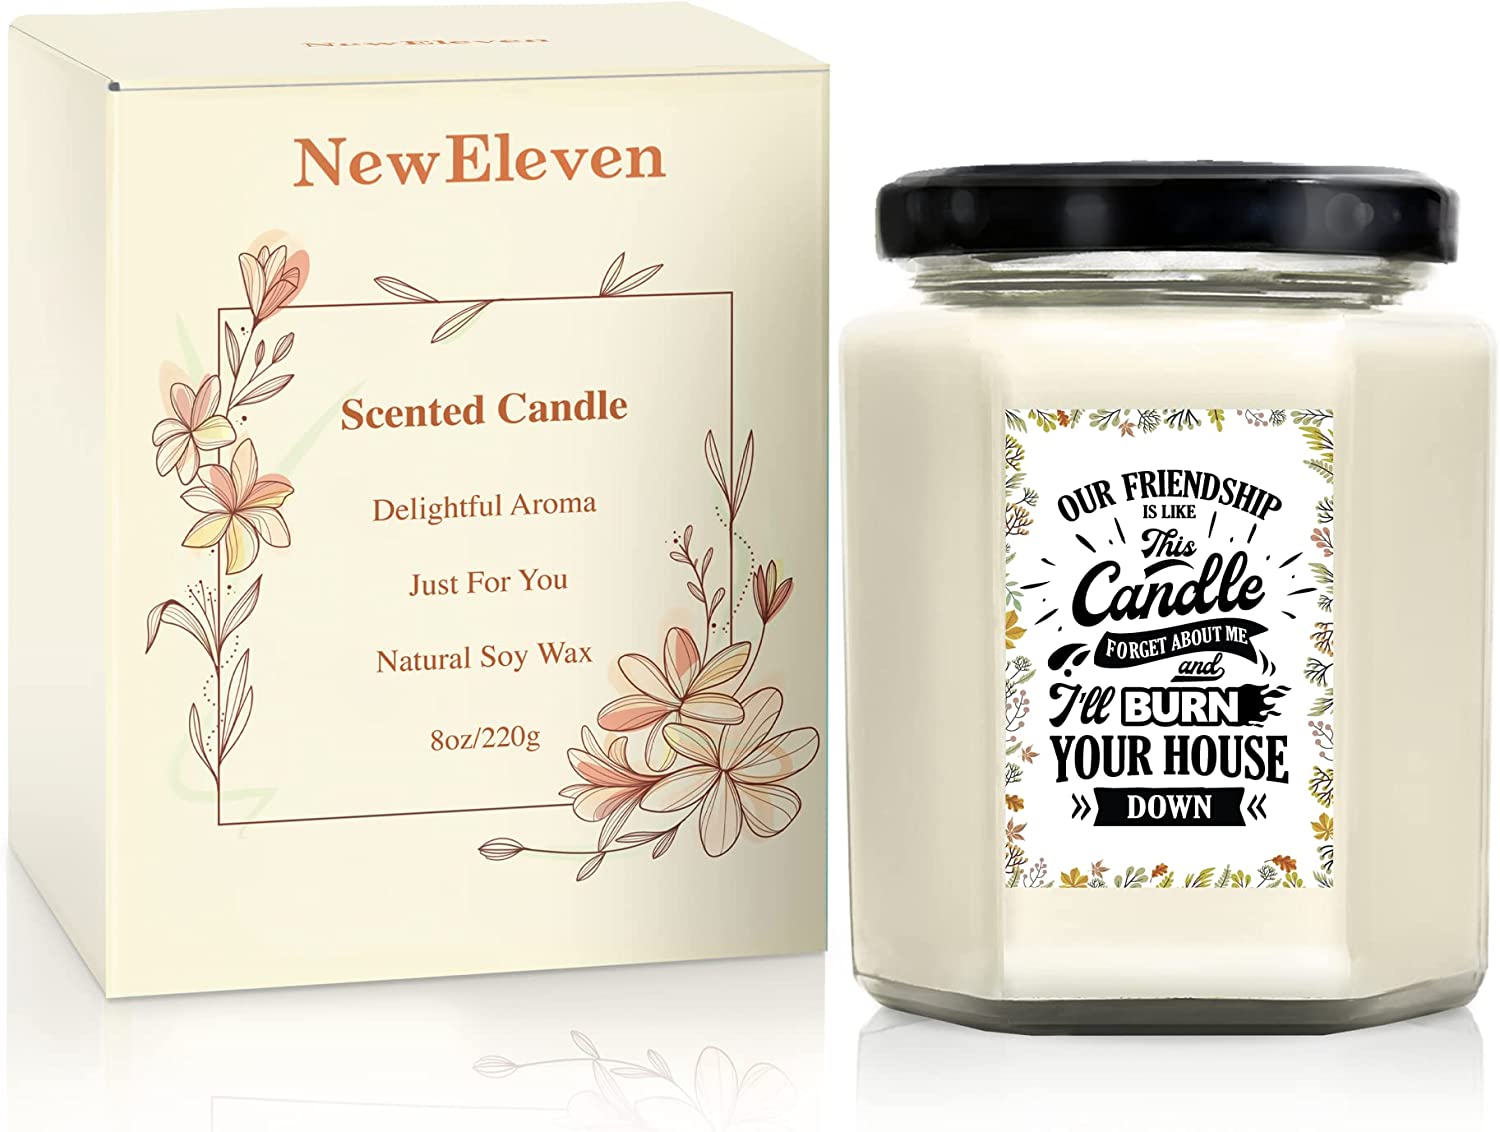 https://cdn.shopify.com/s/files/1/0008/6415/7748/files/Our-friendship-is-like-this-candle-1.jpg?v=1696407786&width=1500